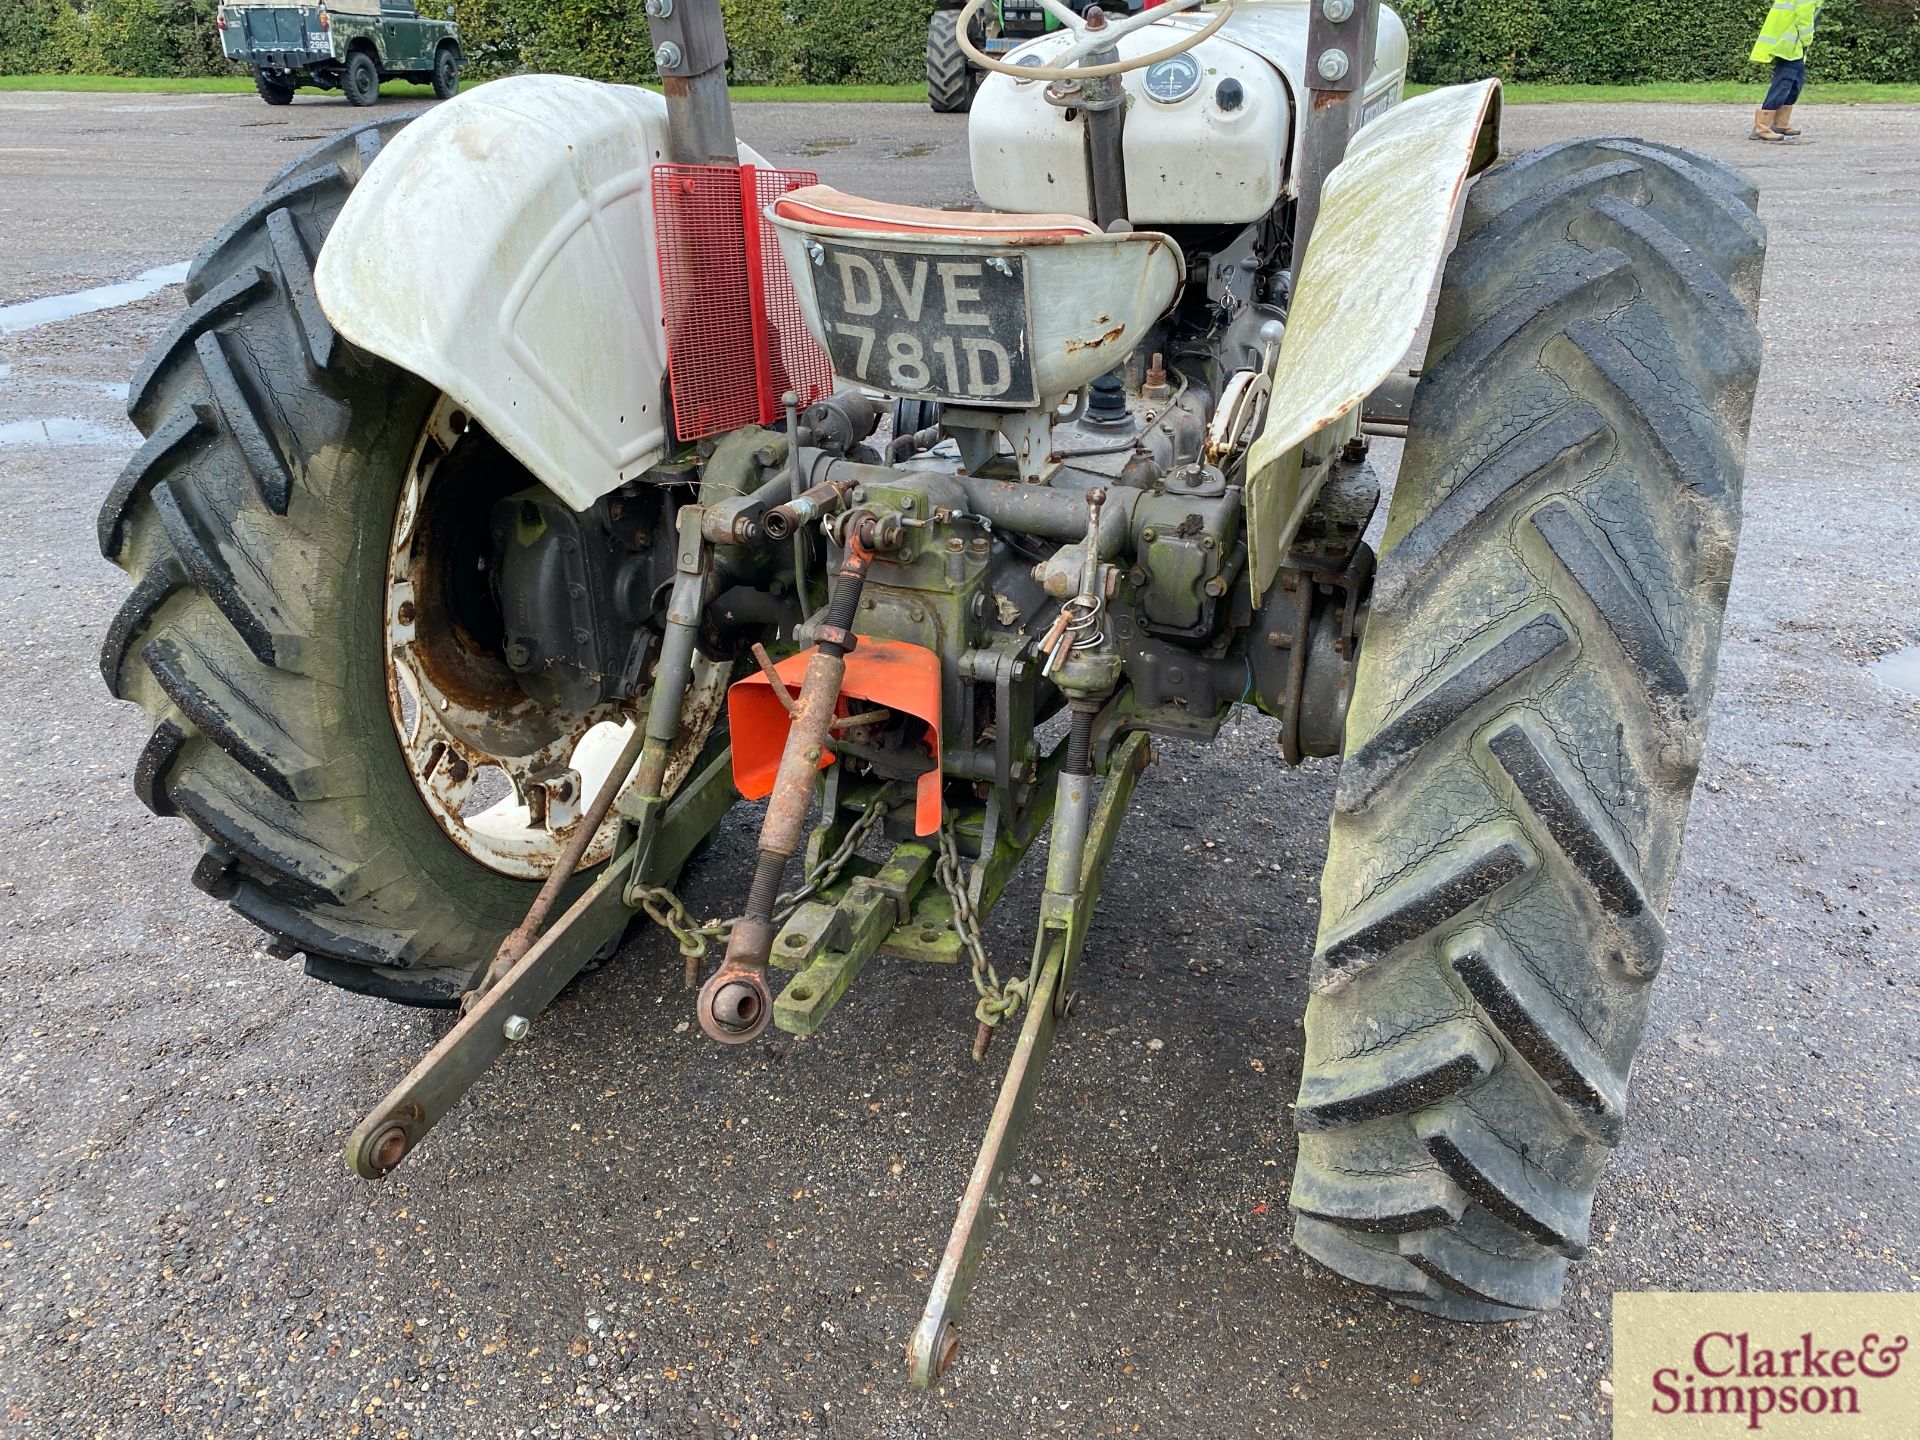 David Brown 990 Selectamatic 2WD tractor. Registration DUE 781D (no paperwork). Serial number 990A/ - Image 18 of 31